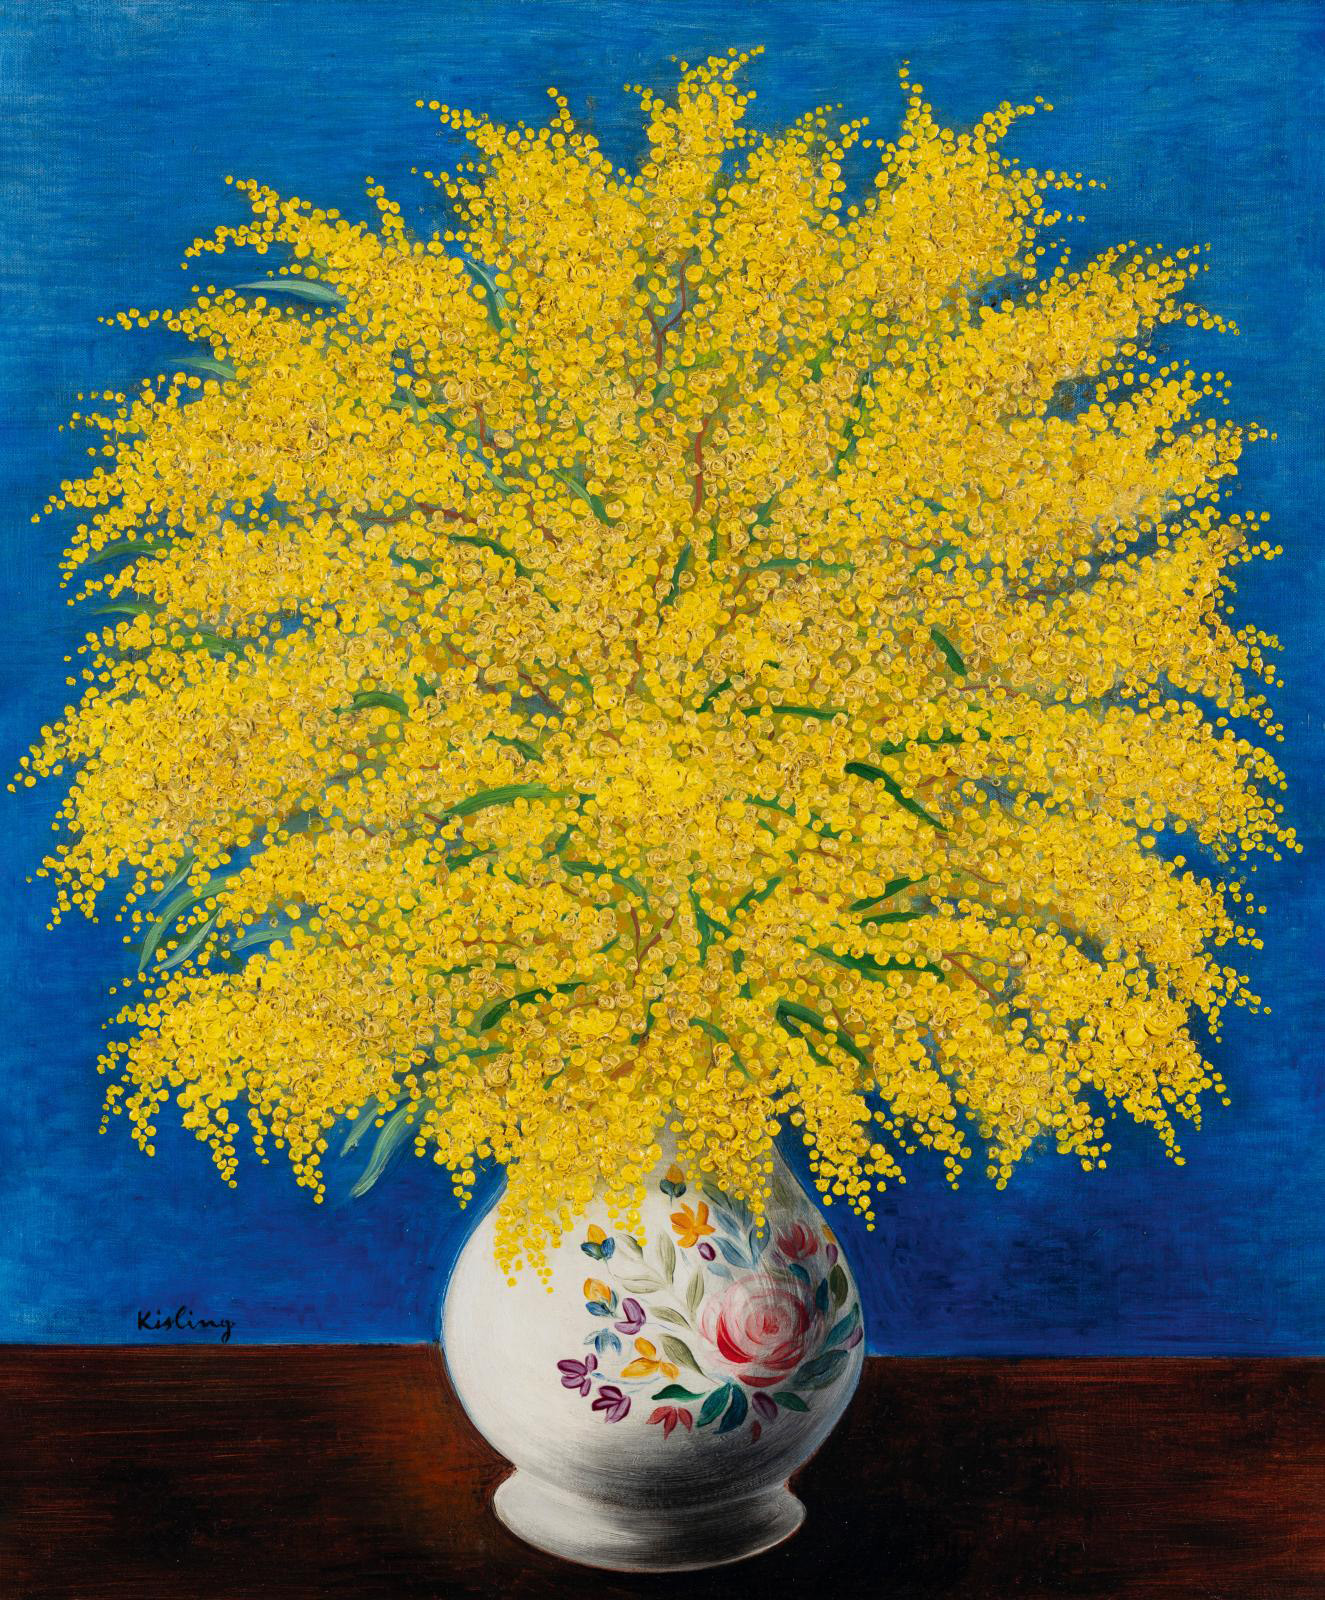 Mimosas of Provence in Bloom by Moïse Kisling